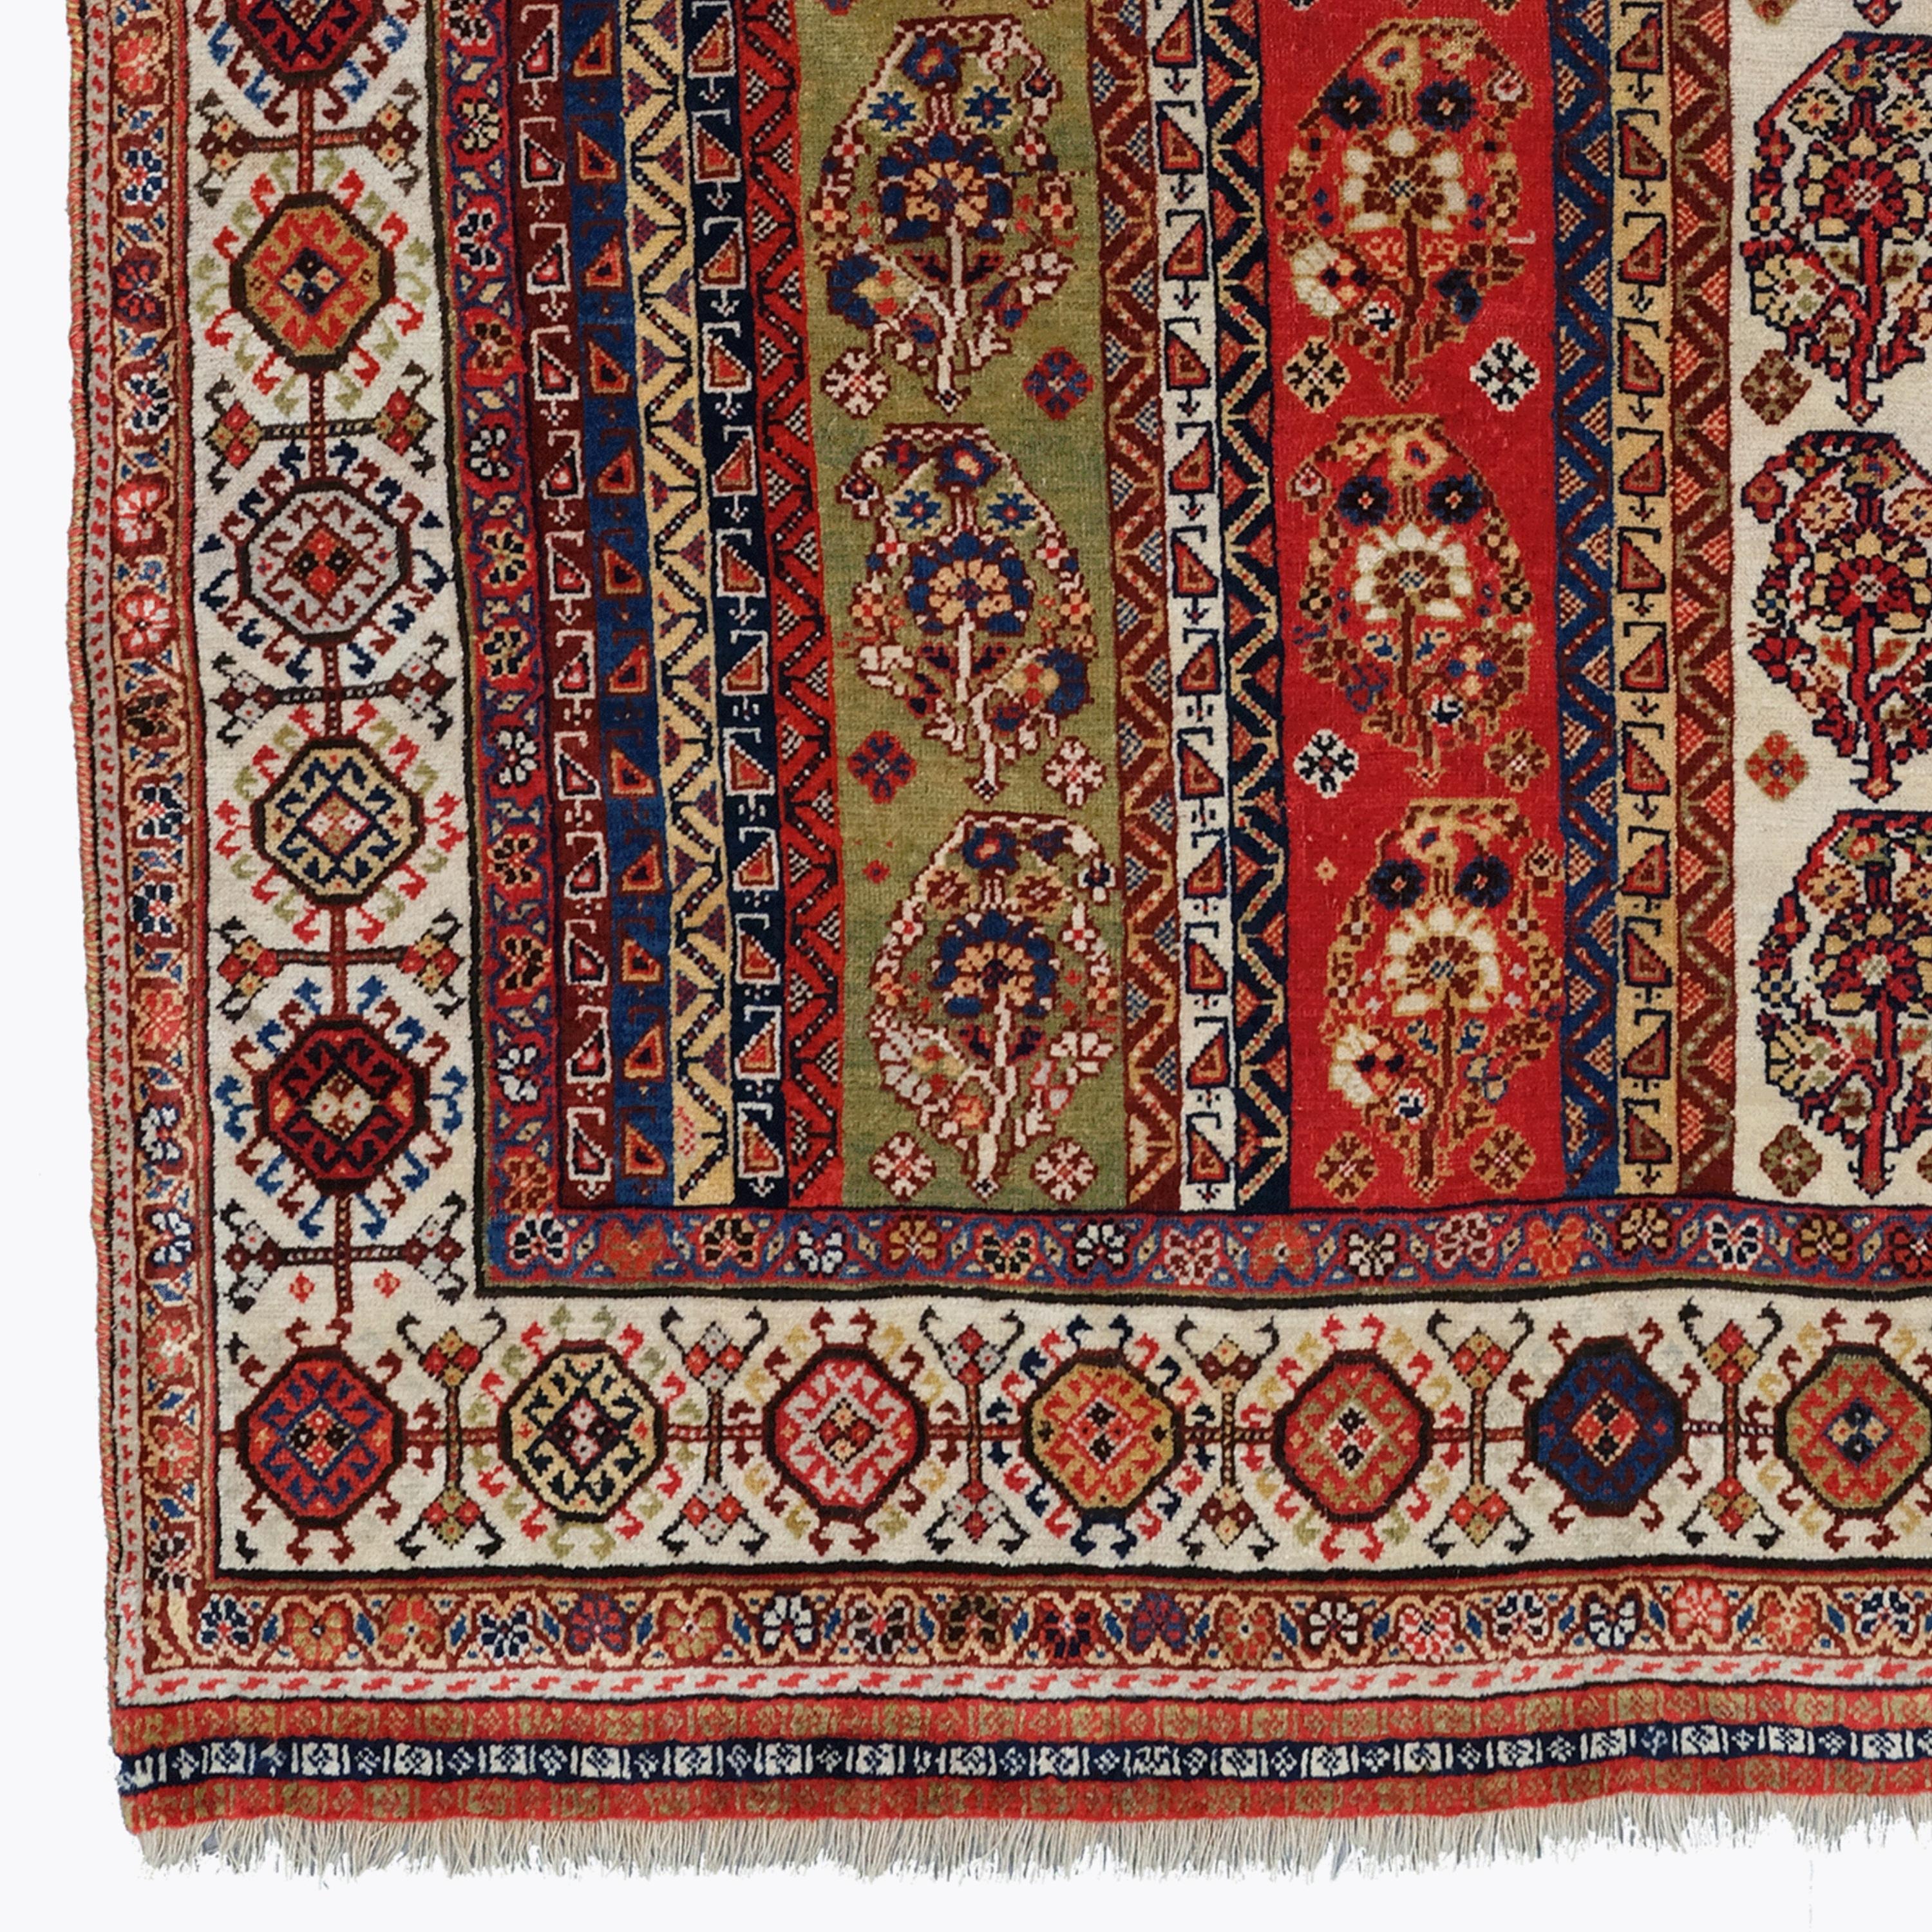 Antique Shekarlu Qashqai Rug of Scarce Striped Design
Size: 127×175 cm

This rug has a very unusual design of vertical stripes which contain a small boteh design. The array of colours is outstanding including yellows, blues, reds and greens. The